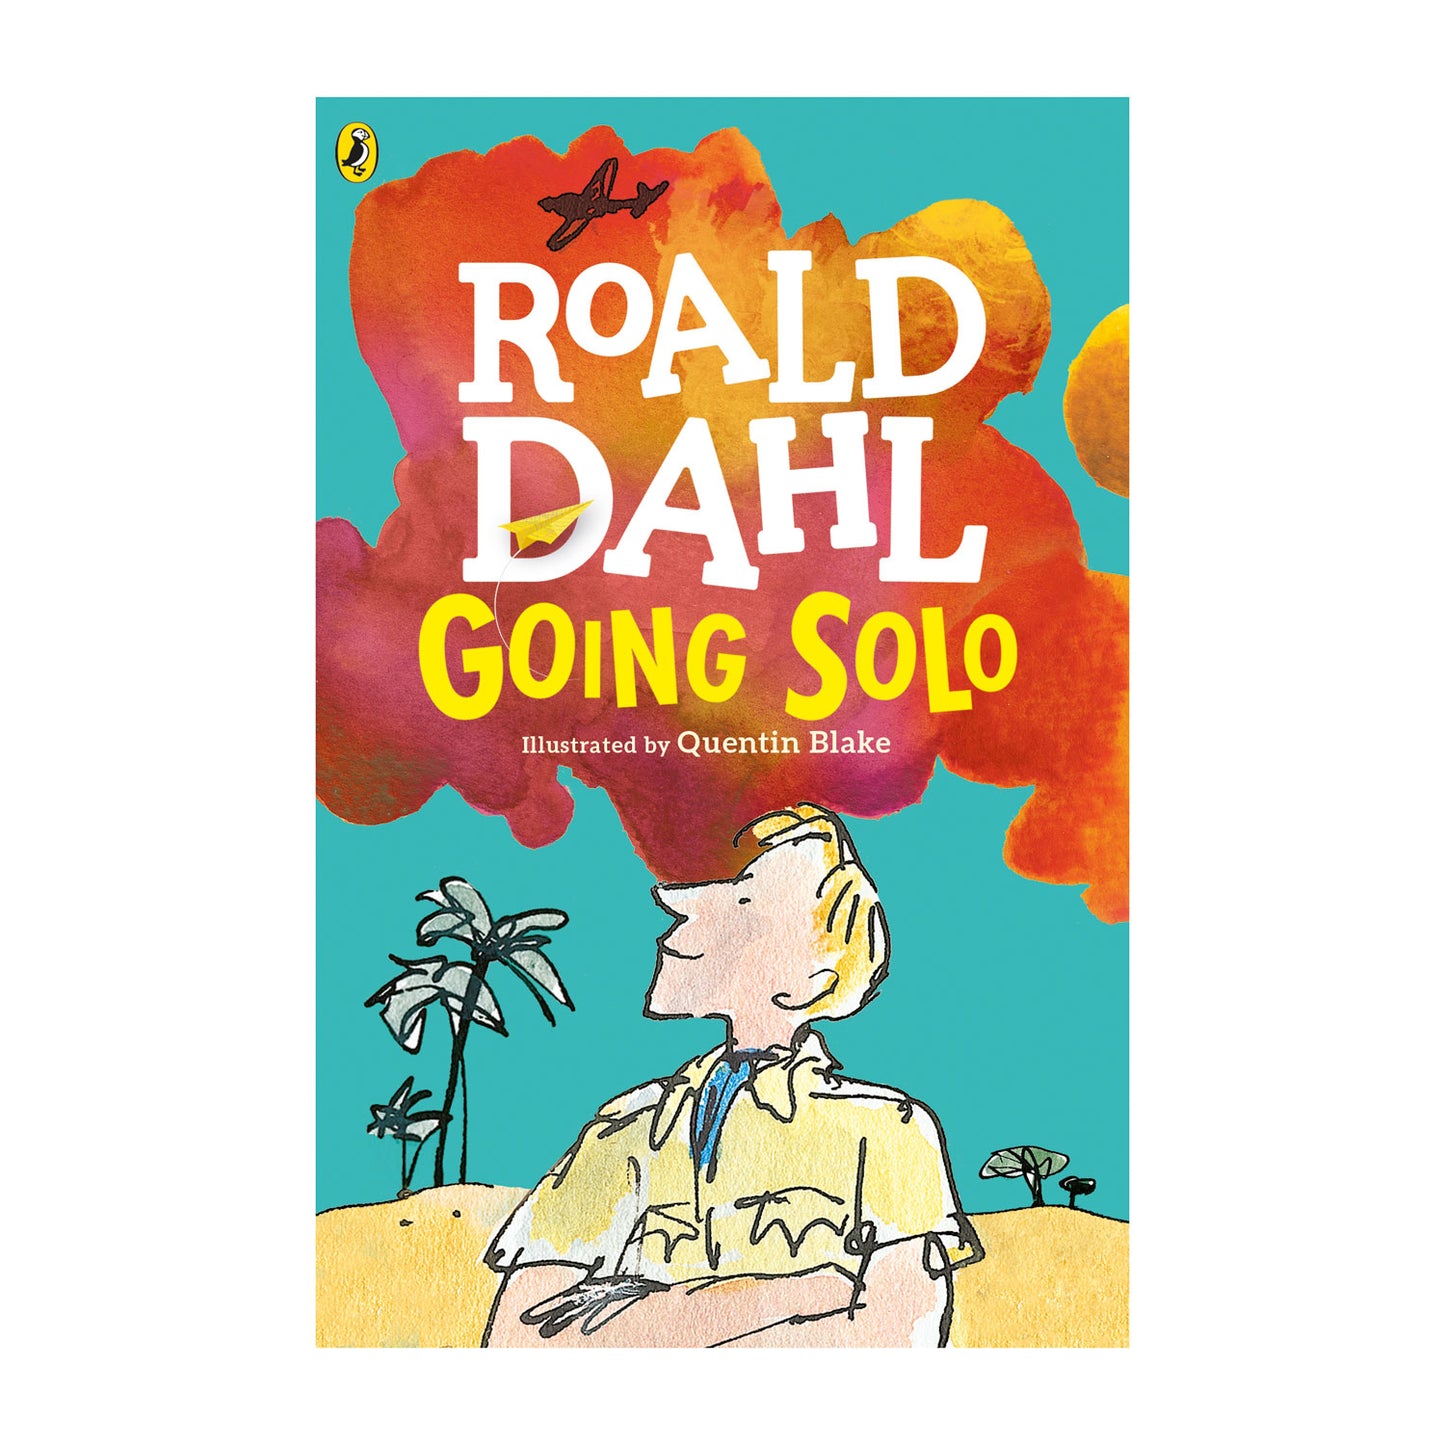 Going Solo by Roald Dahl with illustrations by Quentin Blake